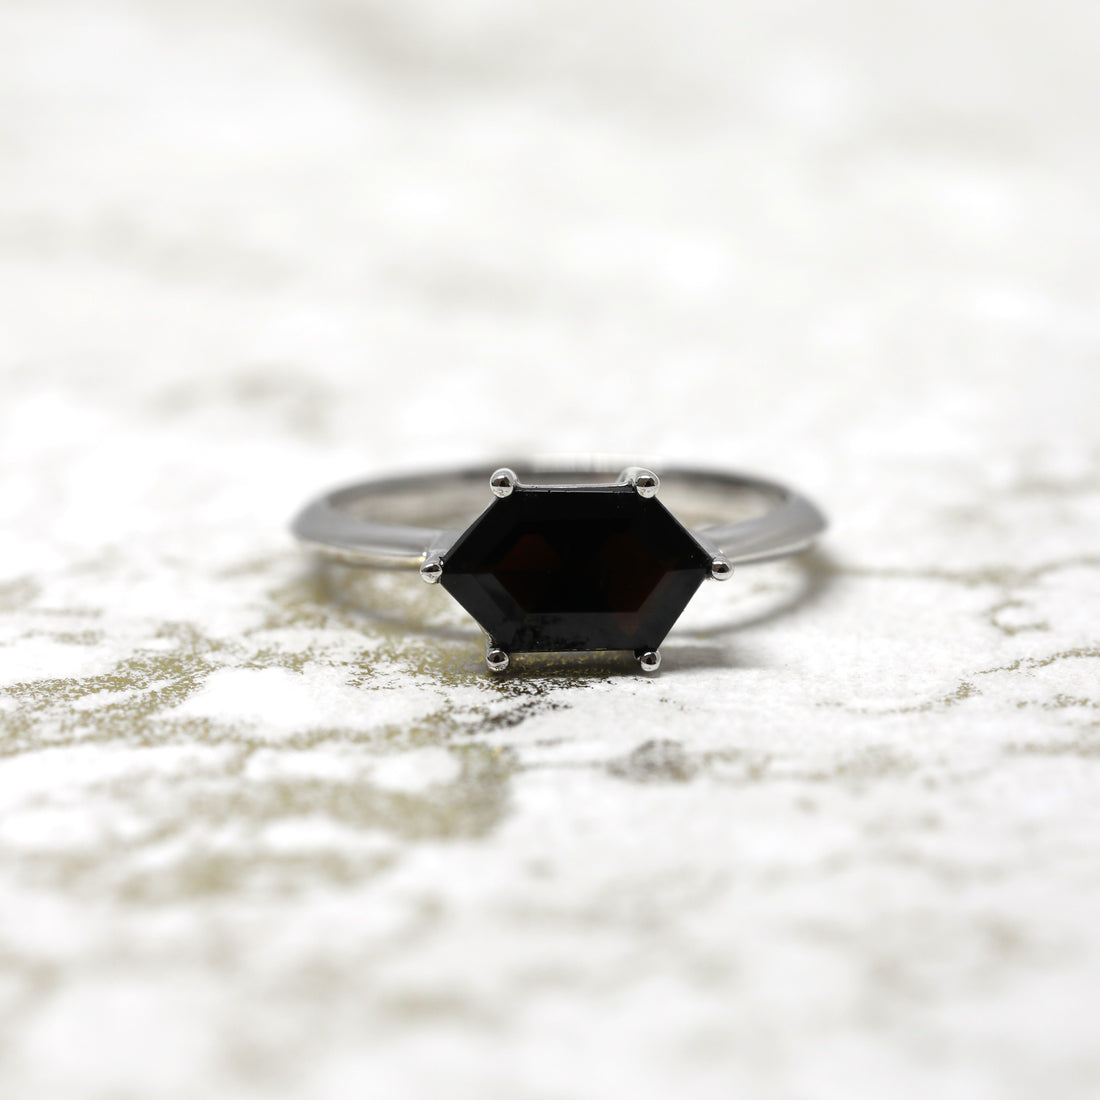 Front view of hexagonal black gemstone ring bridal edgy design bena jewelry montreal made in canada custom bridal jewelry color gemstone ring designer specialist montreal bold black dark gems bridal ring